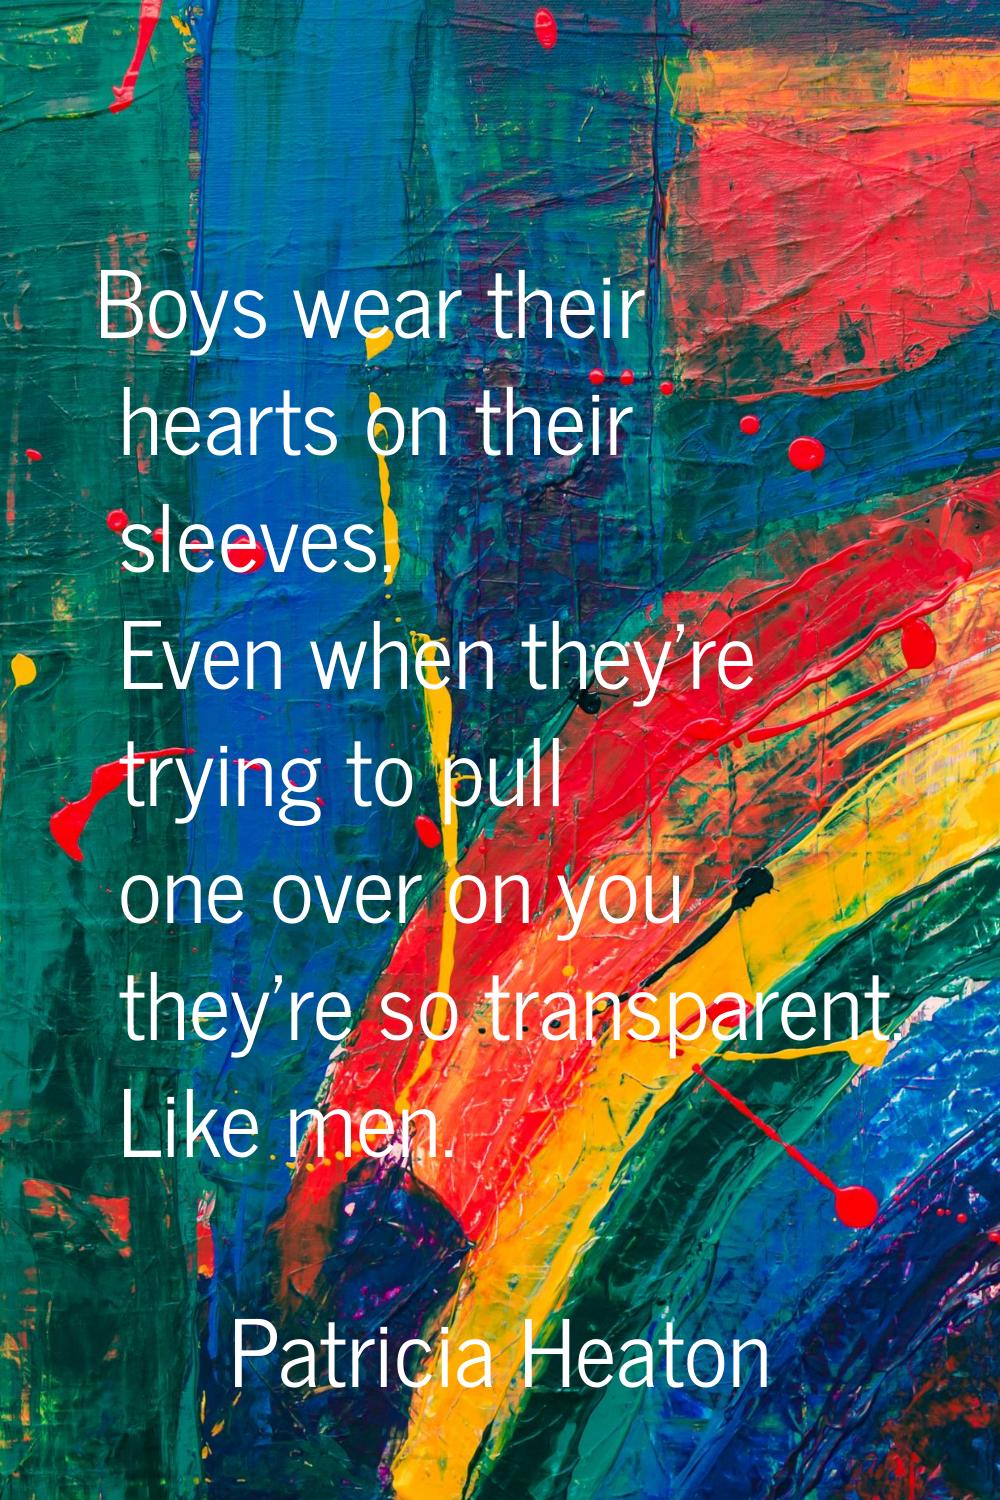 Boys wear their hearts on their sleeves. Even when they're trying to pull one over on you they're s